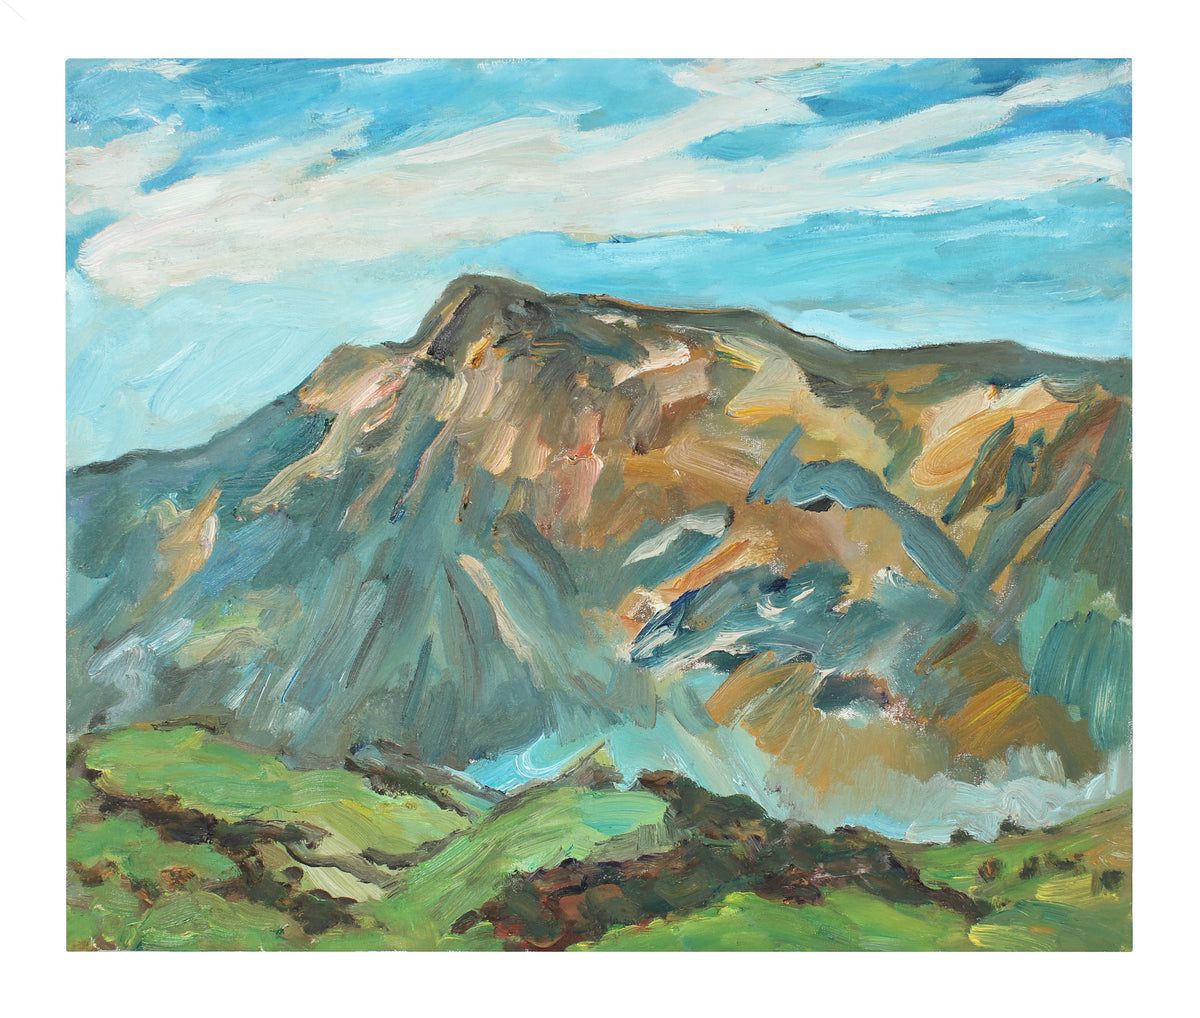 &lt;i&gt;Mt. Saint Helens&lt;/i&gt;&lt;br&gt;1999 Oil&lt;br&gt;&lt;br&gt;#A3692